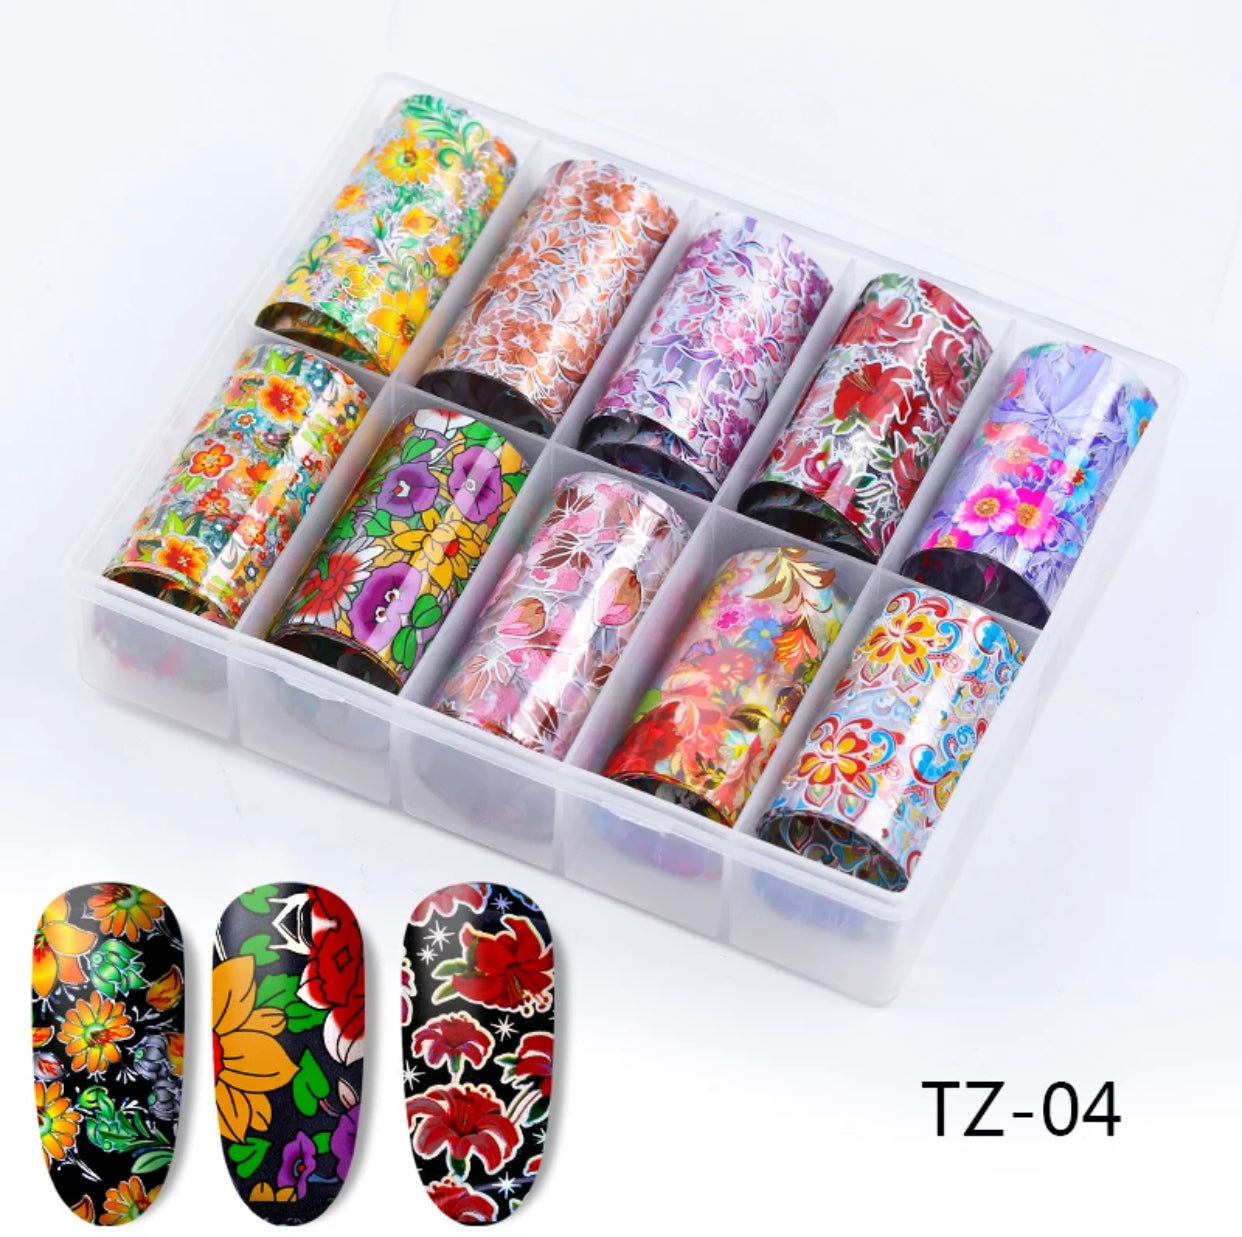 Booming Flowers Design TZ-04 - Premier Nail Supply 